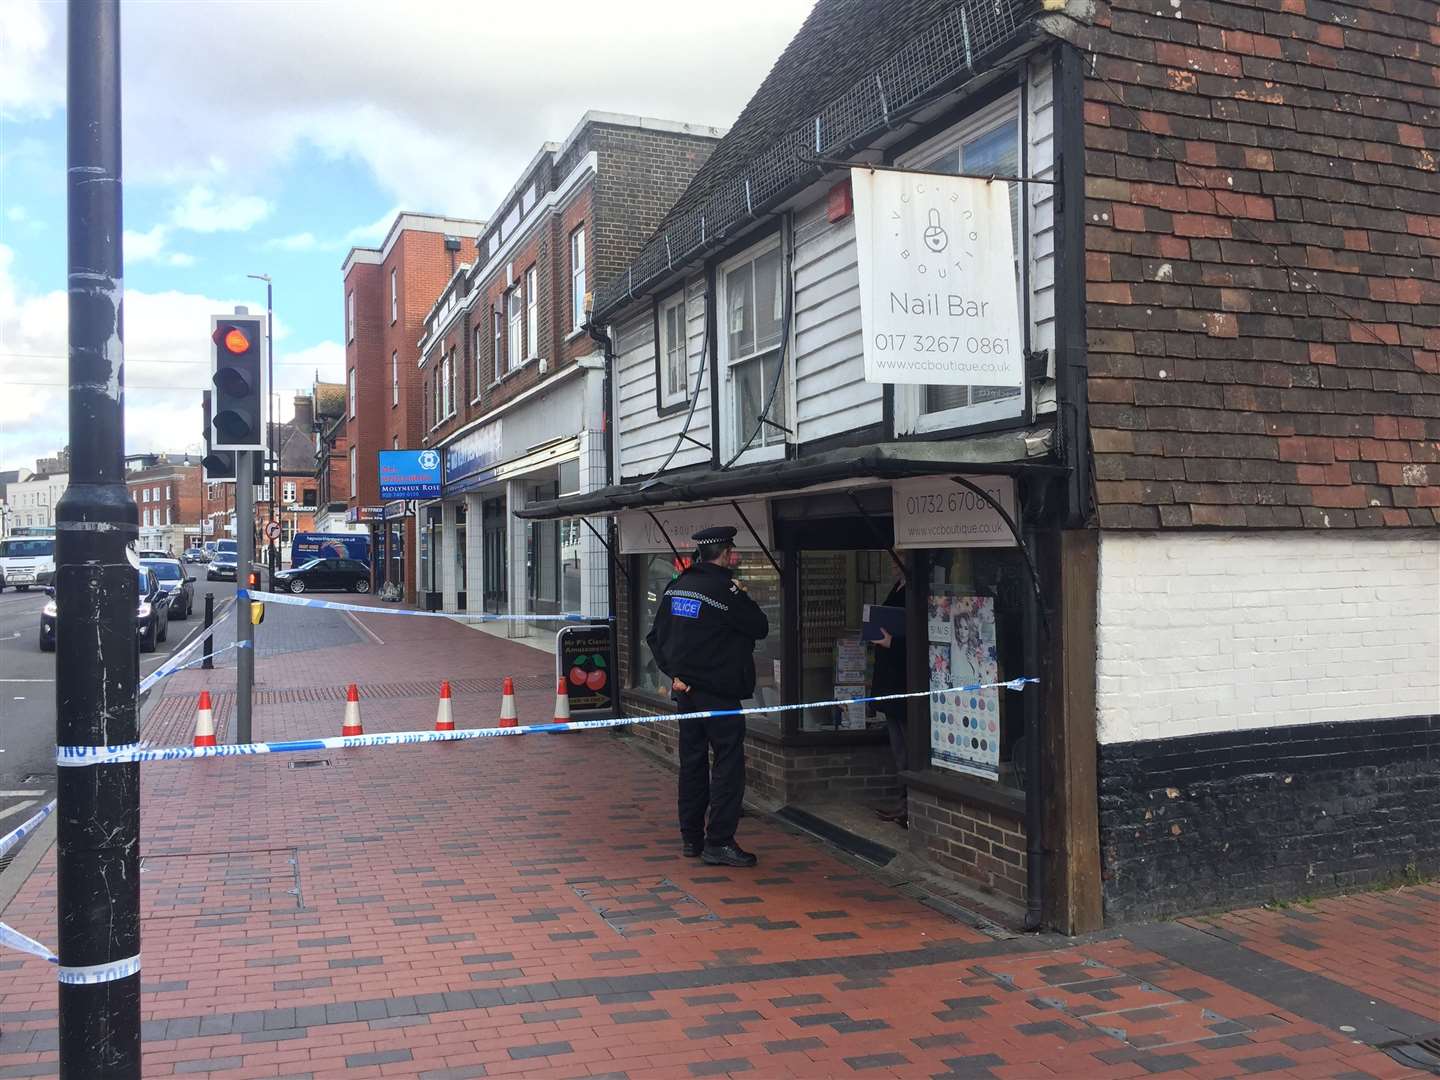 Police outside the nail bar in Tonbridge High Street at the time